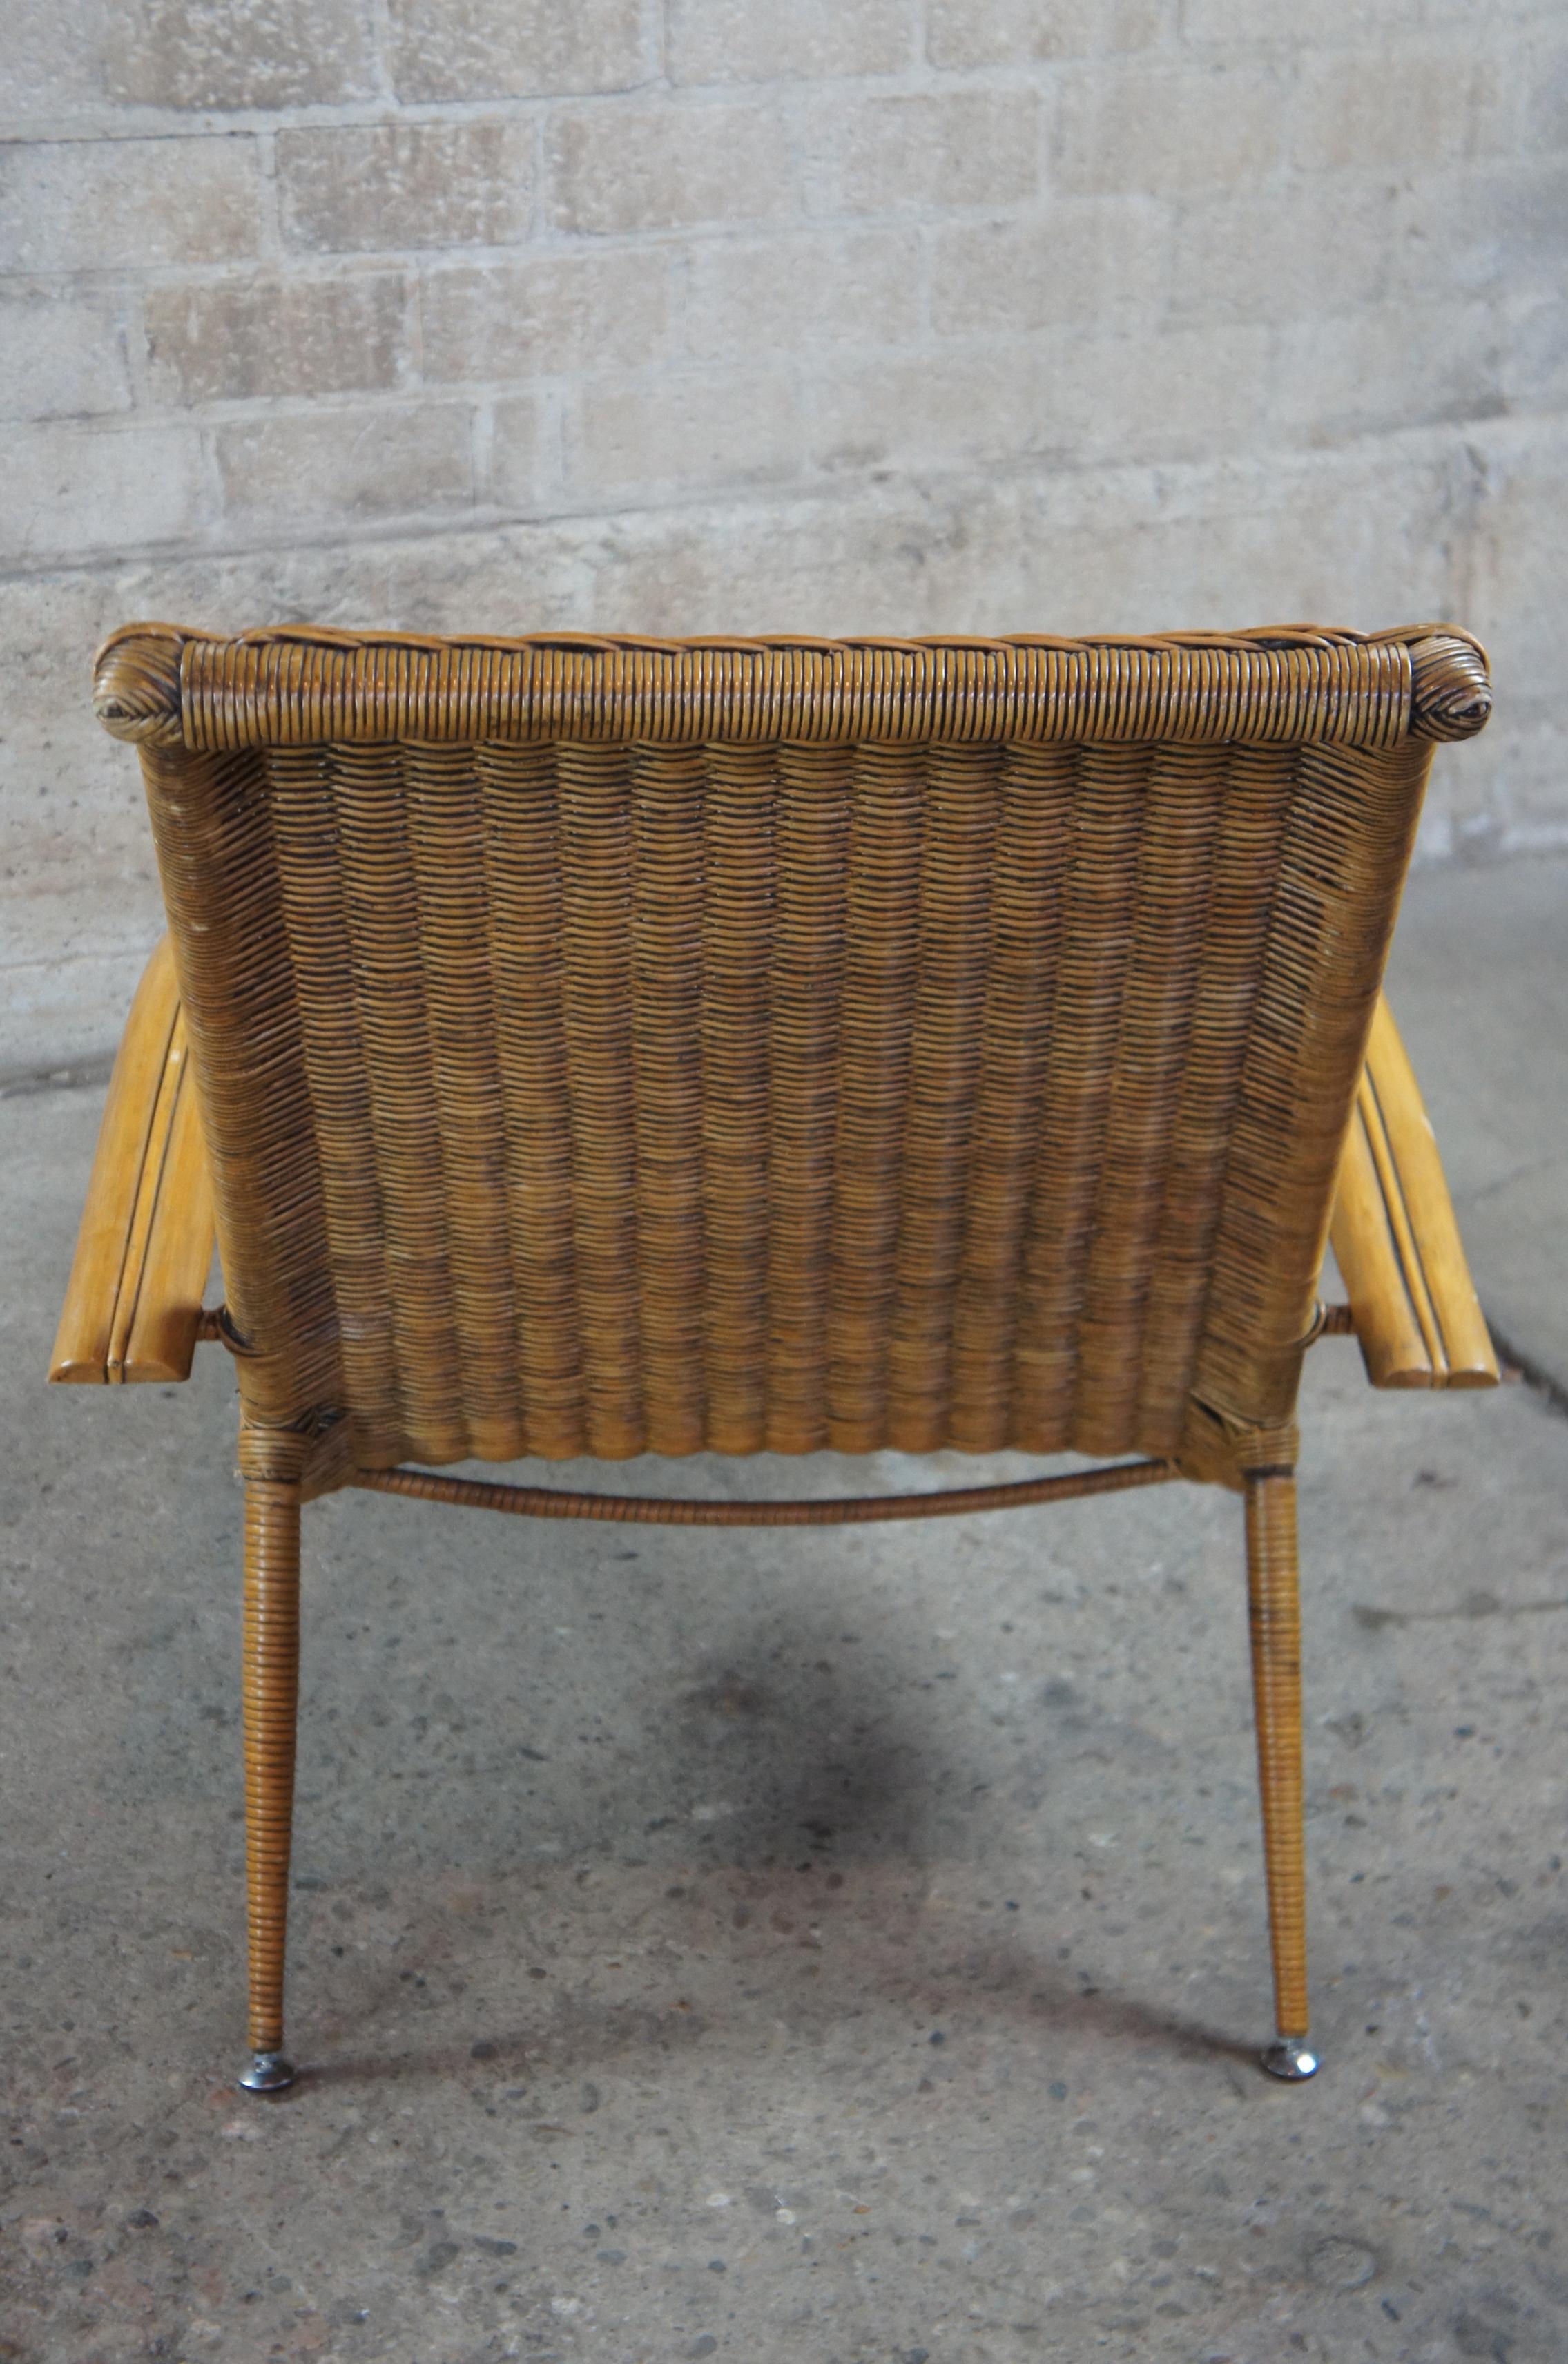 20th Century Midcentury Sculptural Italian Modern Cane and Bamboo Chaise Lounge Patio Chair